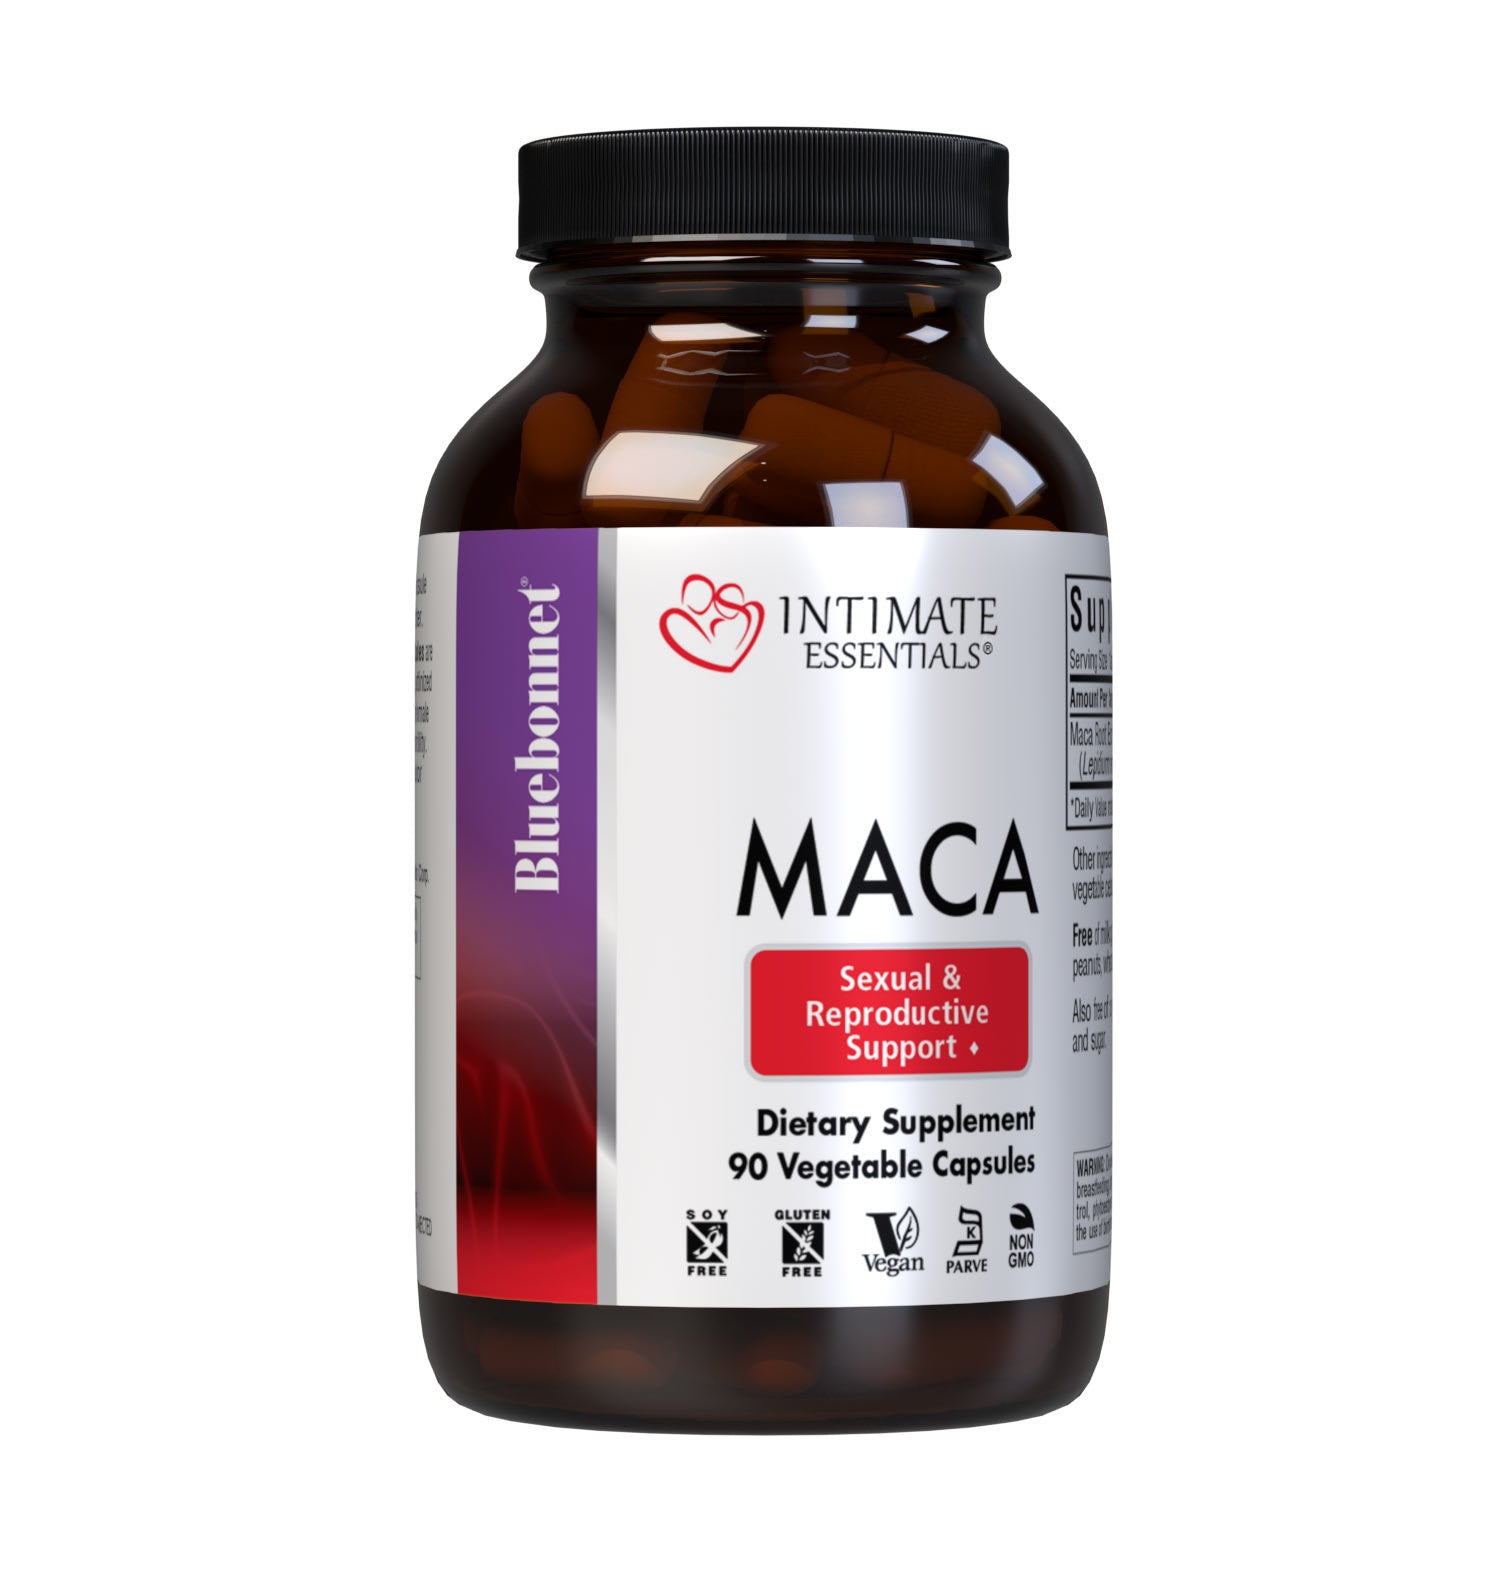 Bluebonnet’s Intimate Essentials Maca Vegetable Capsules are specially formulated with a highly digestible, gelatinized maca root extract for enhancing both male and female hormonal balance, mood, stamina, libido and fertility. #size_90 count